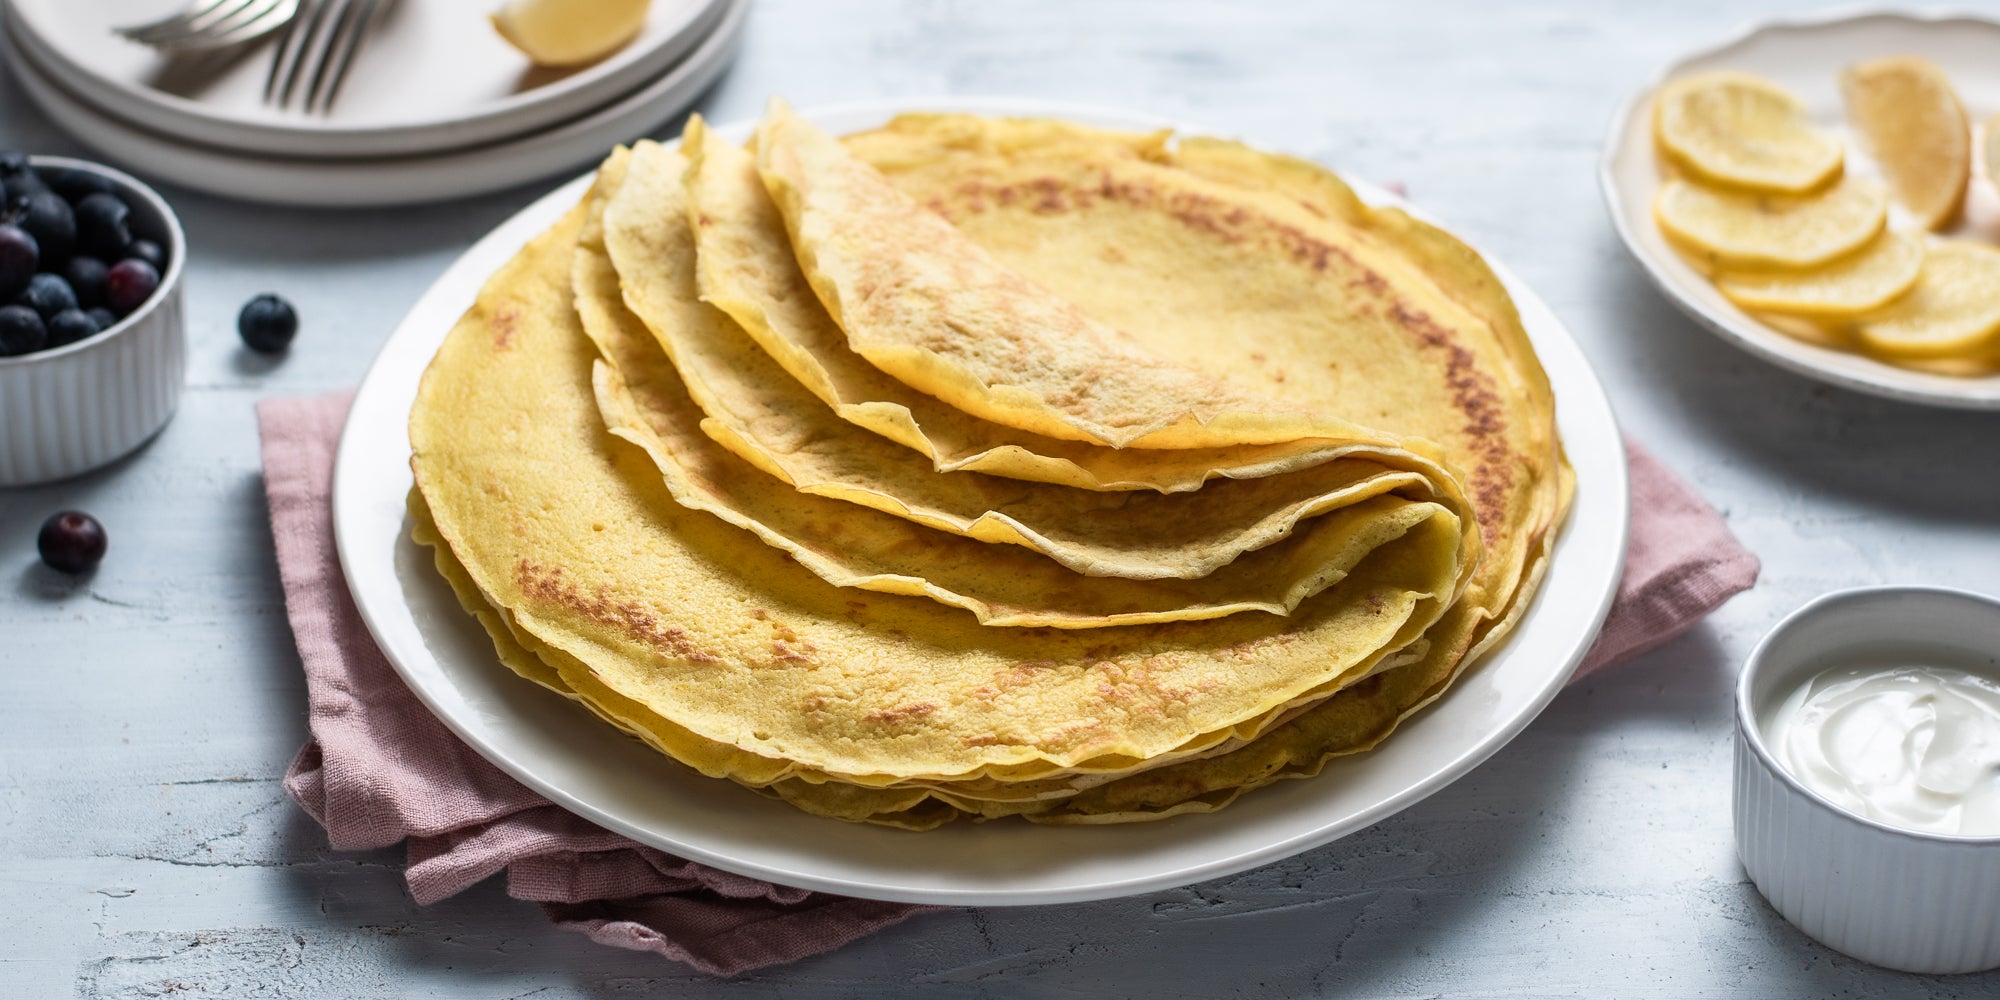 A close up view of turmeric and lemon pancakes on a plate